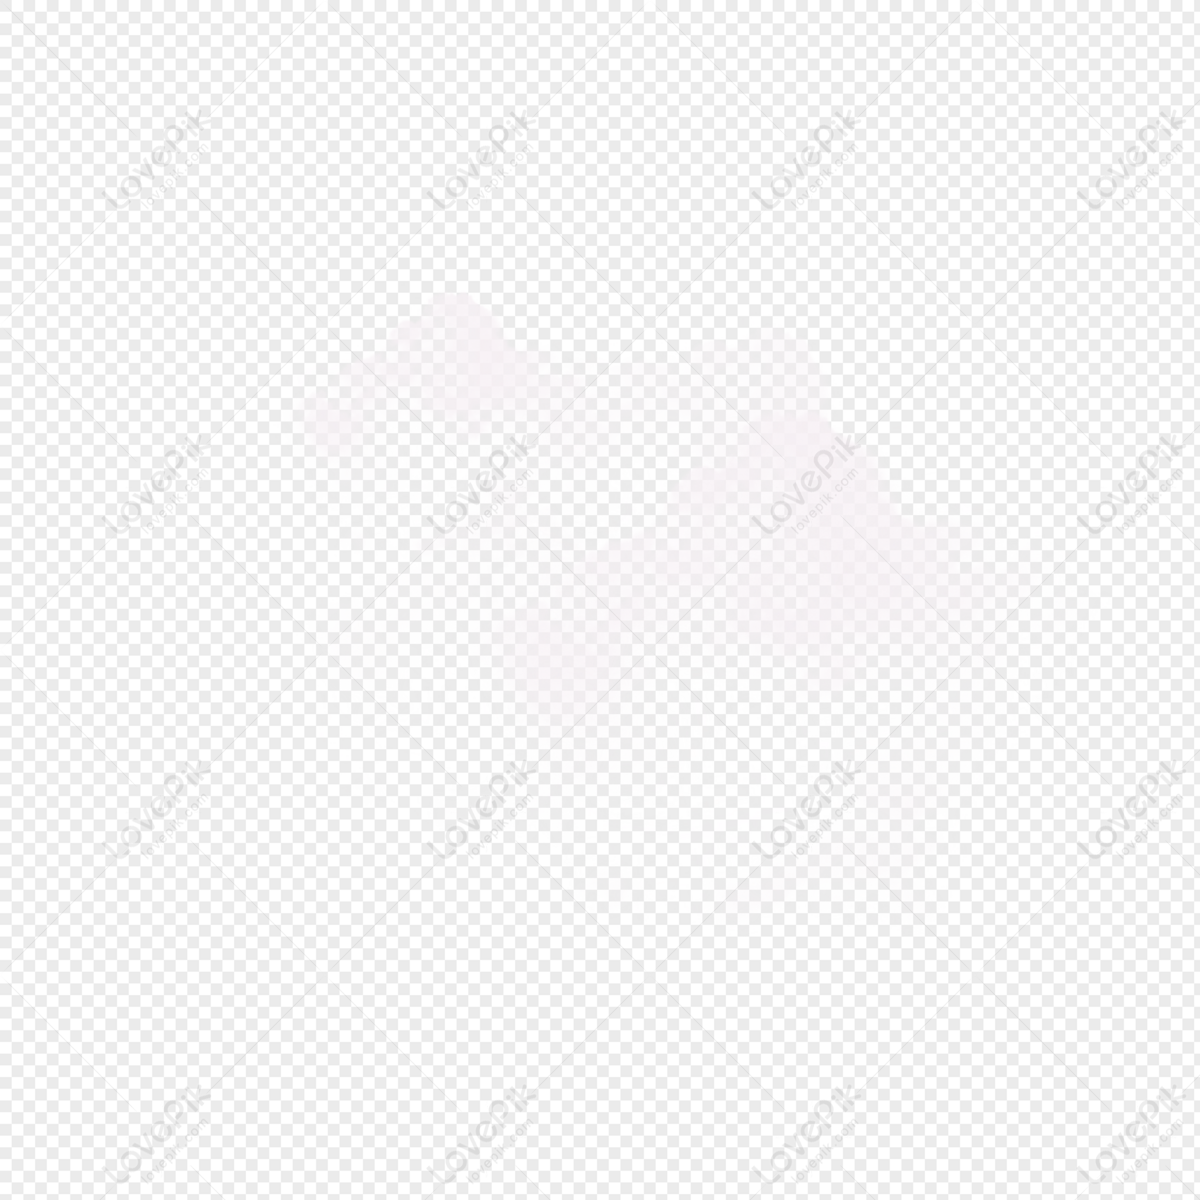 White Heavy Clouds, Sky White, Black Clouds, Clouds Sky PNG Transparent ...